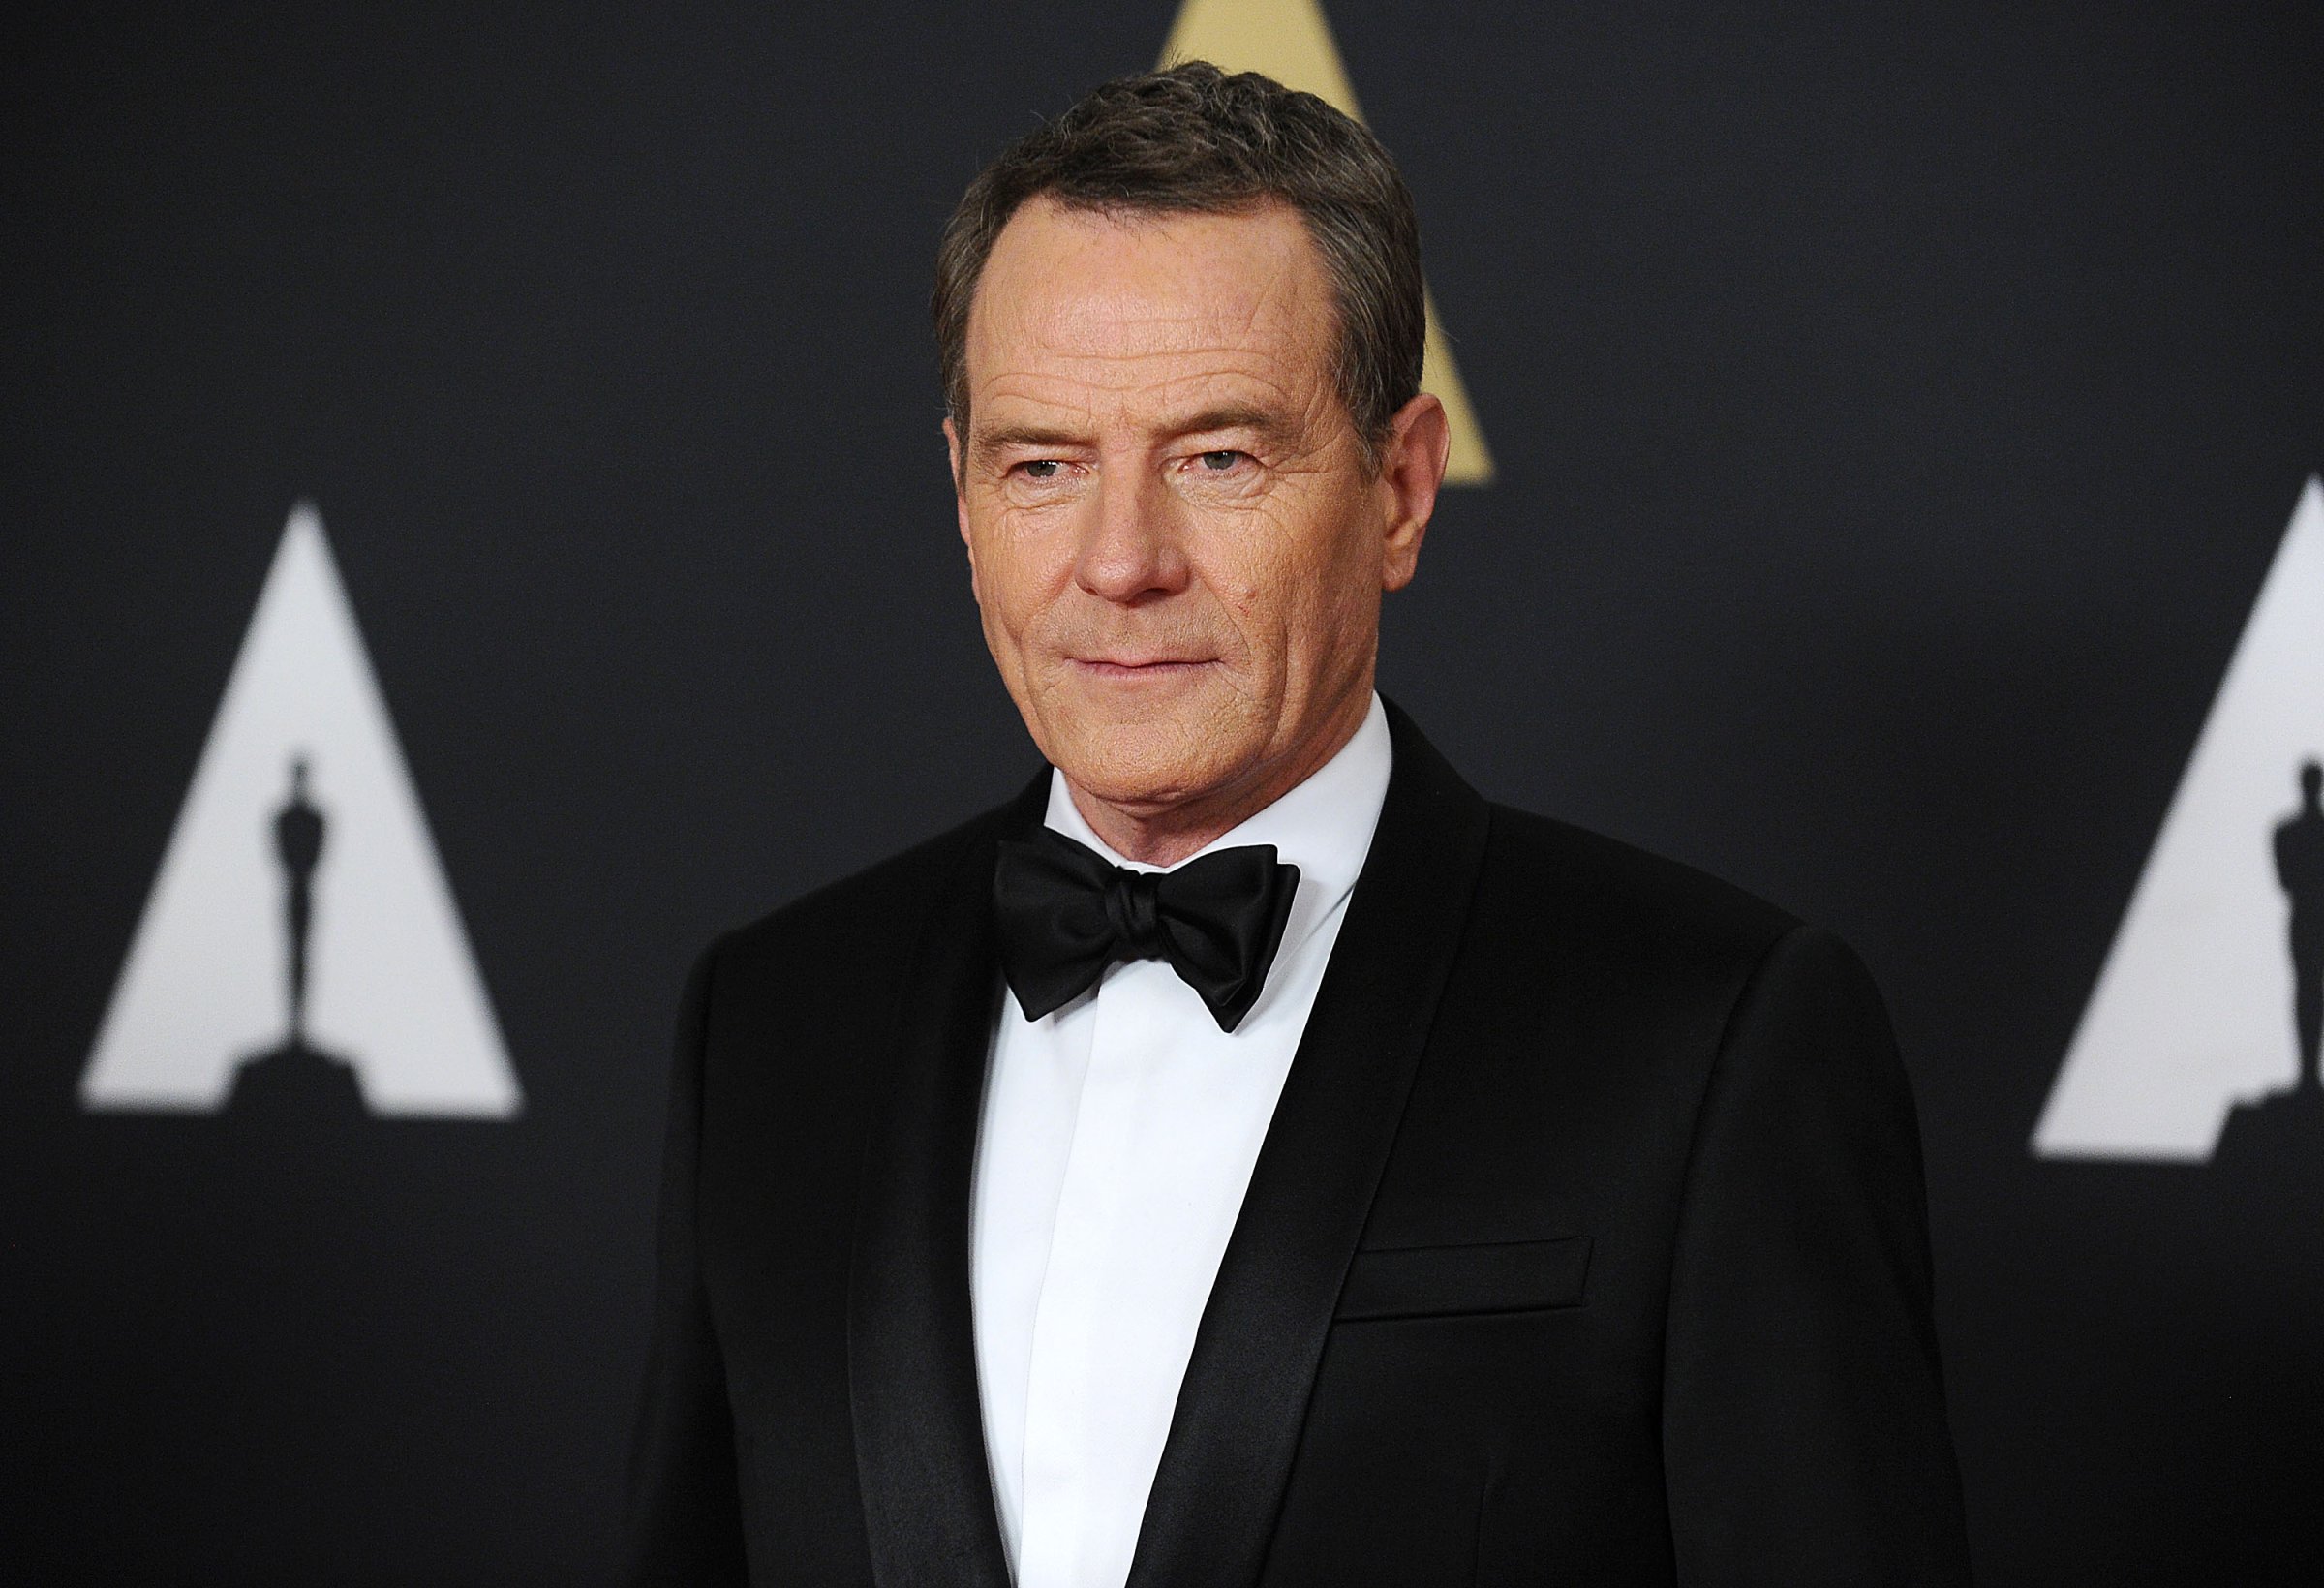 Actor Bryan Cranston attends the 7th annual Governors Awards at The Ray Dolby Ballroom at Hollywood & Highland Center on November 14, 2015 in Hollywood, California.